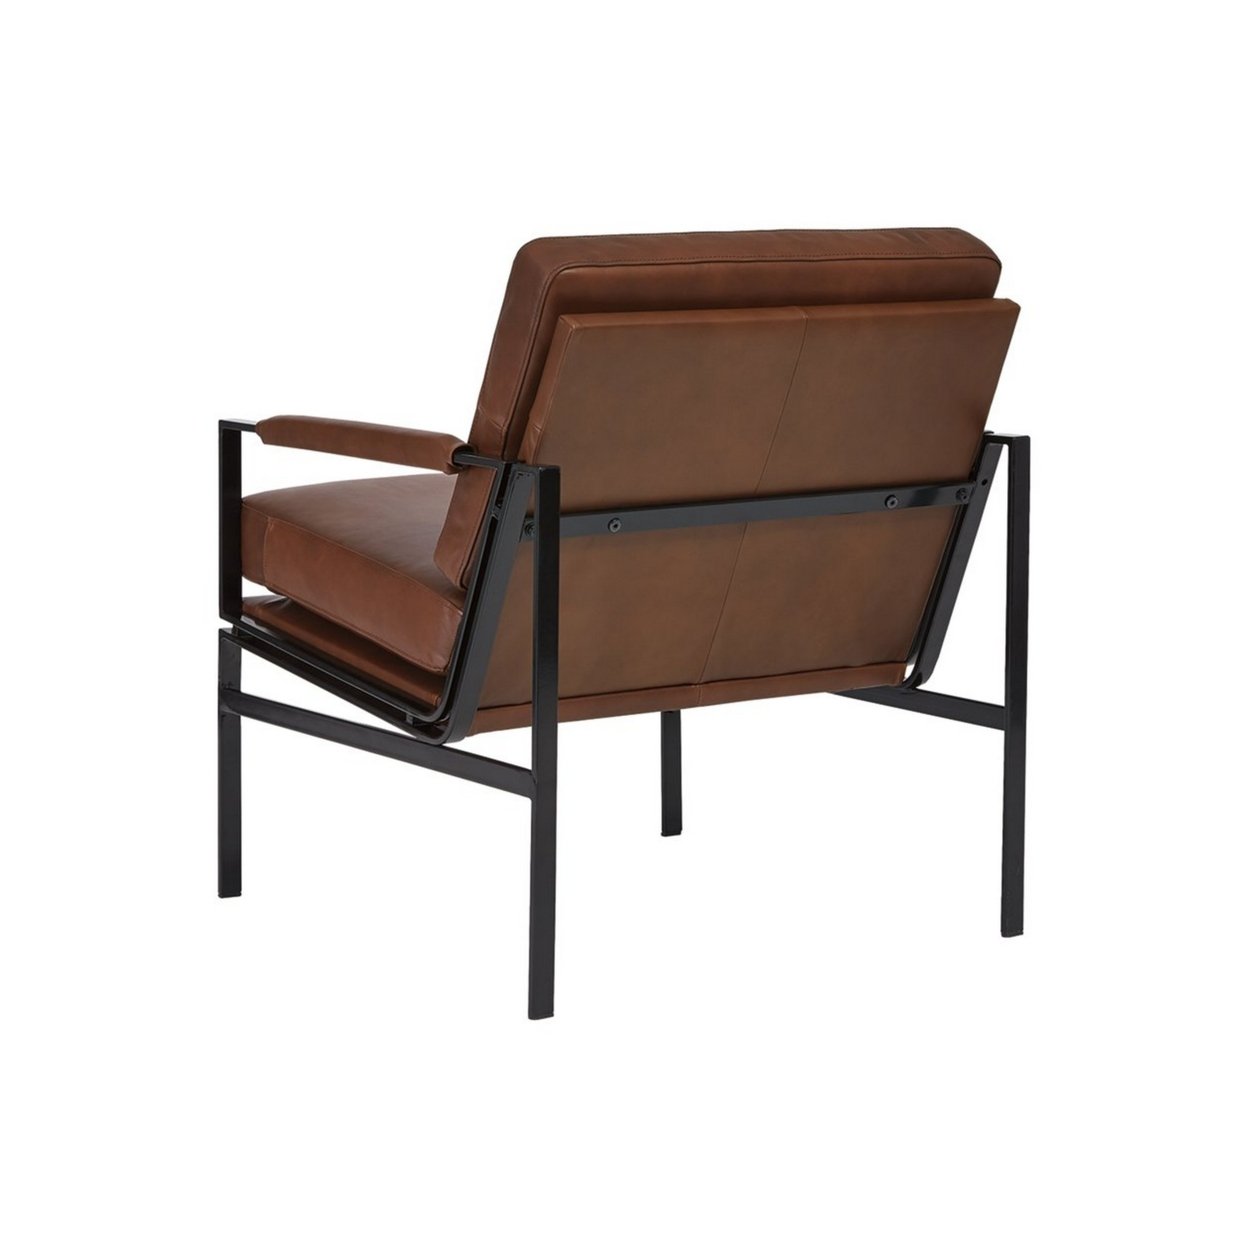 Metal Frame Accent Chair With Leatherette Seat And Back, Brown And Black- Saltoro Sherpi